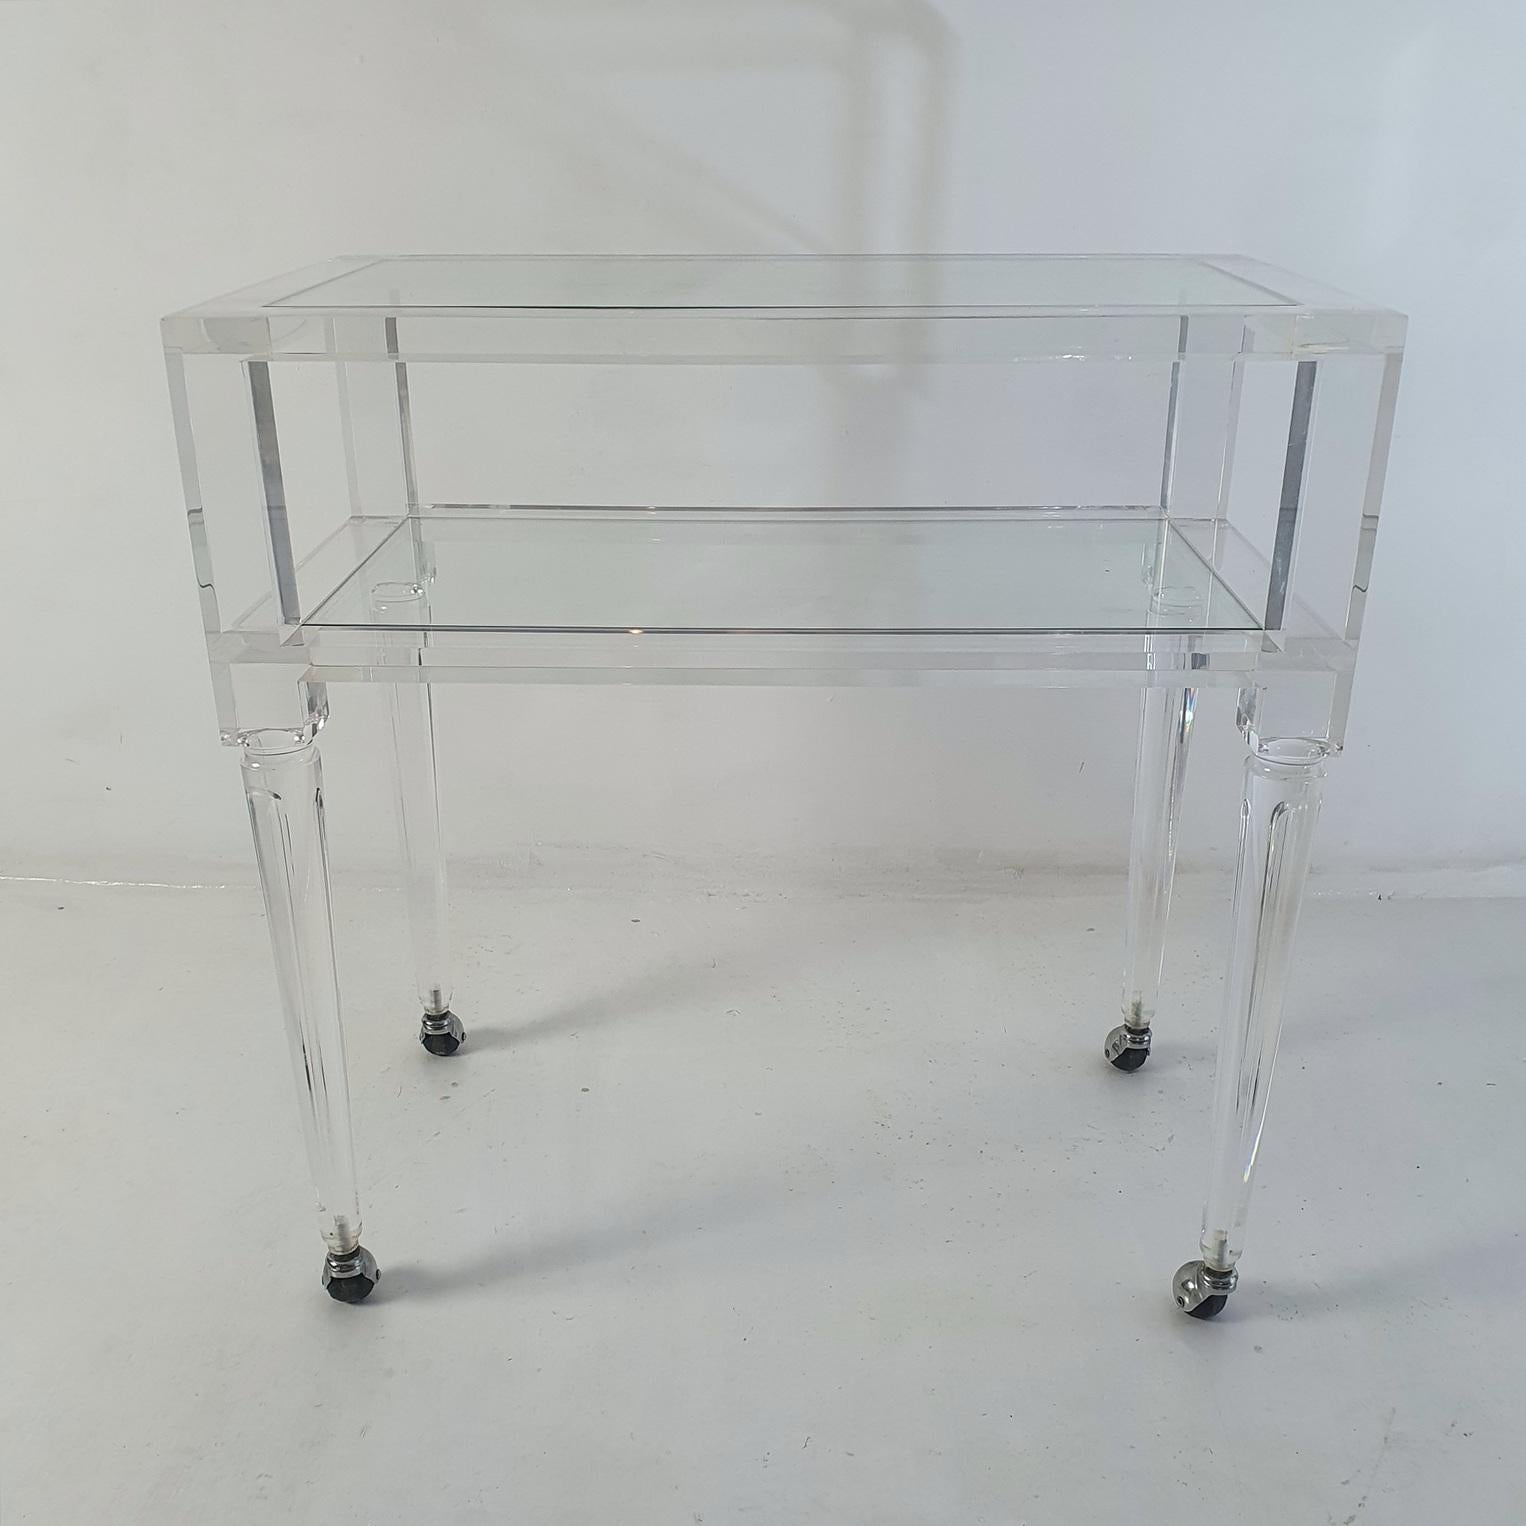 A two tiered bar cart in in lucite/plexiglass with shelves in glass. In very good condition and very stabile. It also is easy to move with the castors working very well. Very nice condition and minimal wear to the lucite.
Perfect as a bar or a side